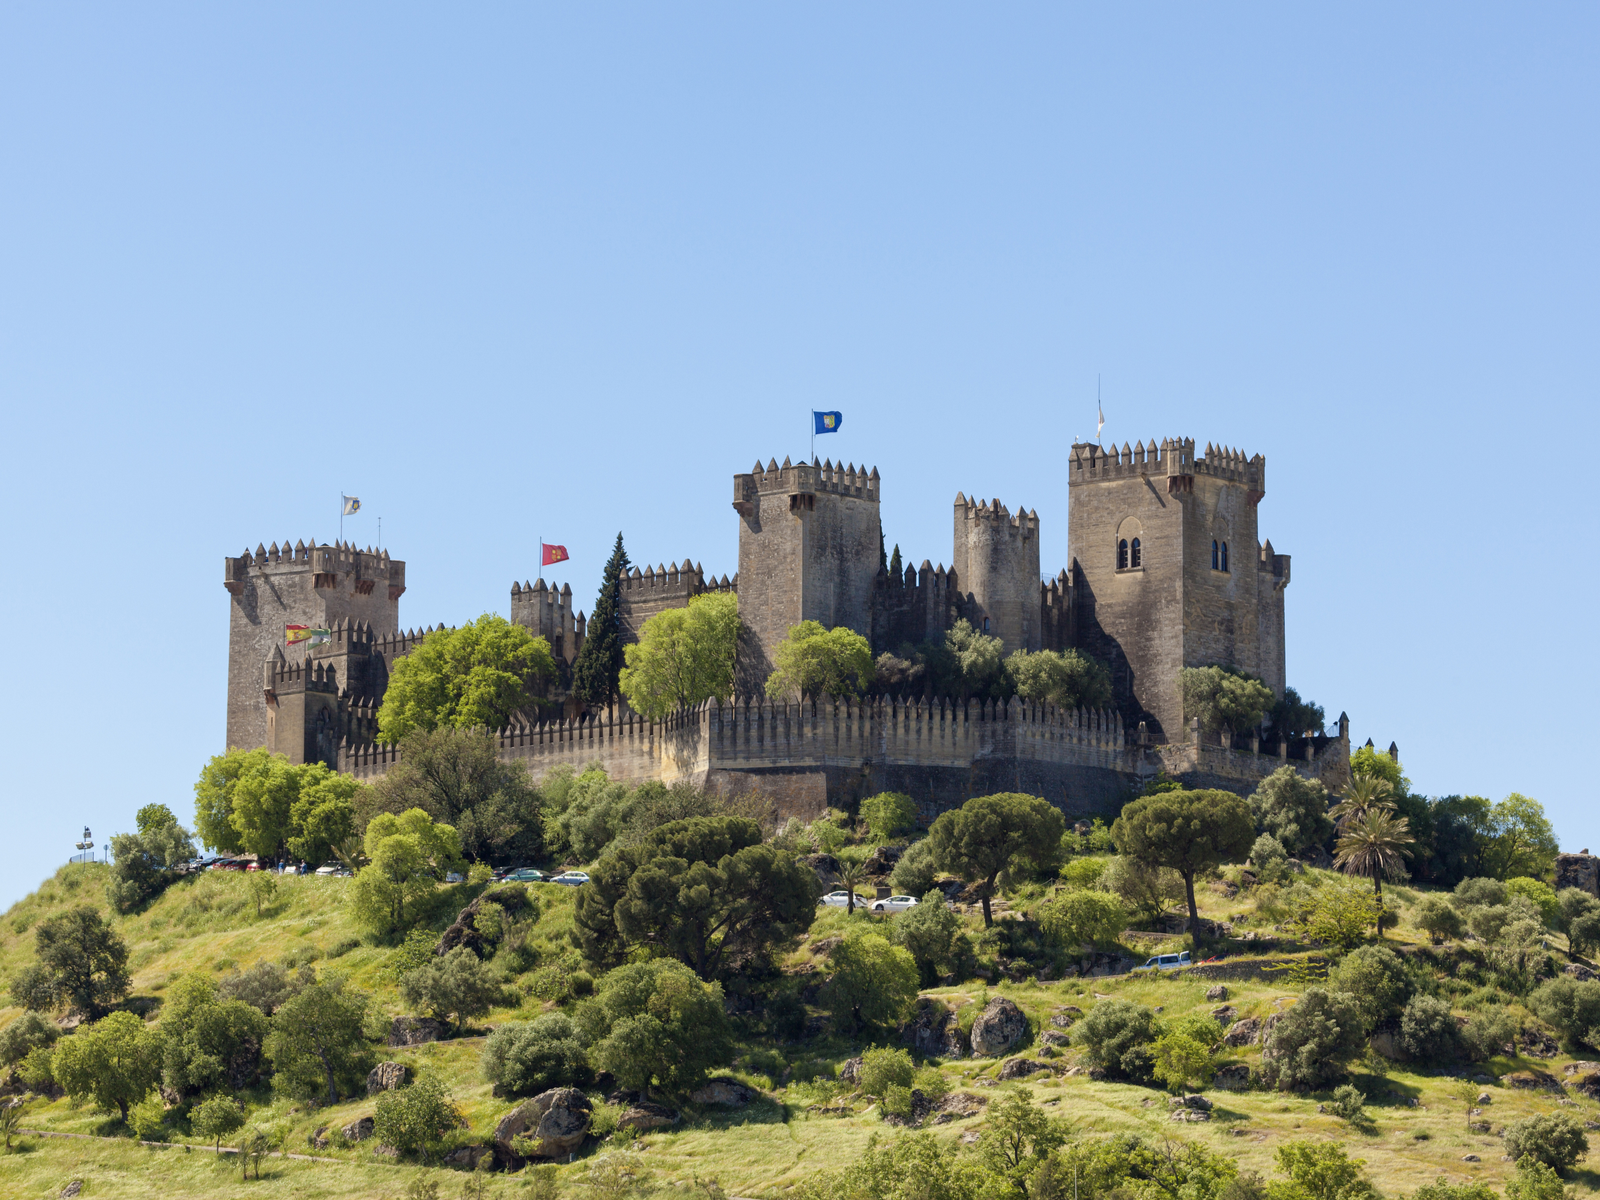 An old fortified medieval fortress on top of a hill, Castillo Almodovar del Rio in Spain, is one of the Game of Thrones filming locations you can visit in real life